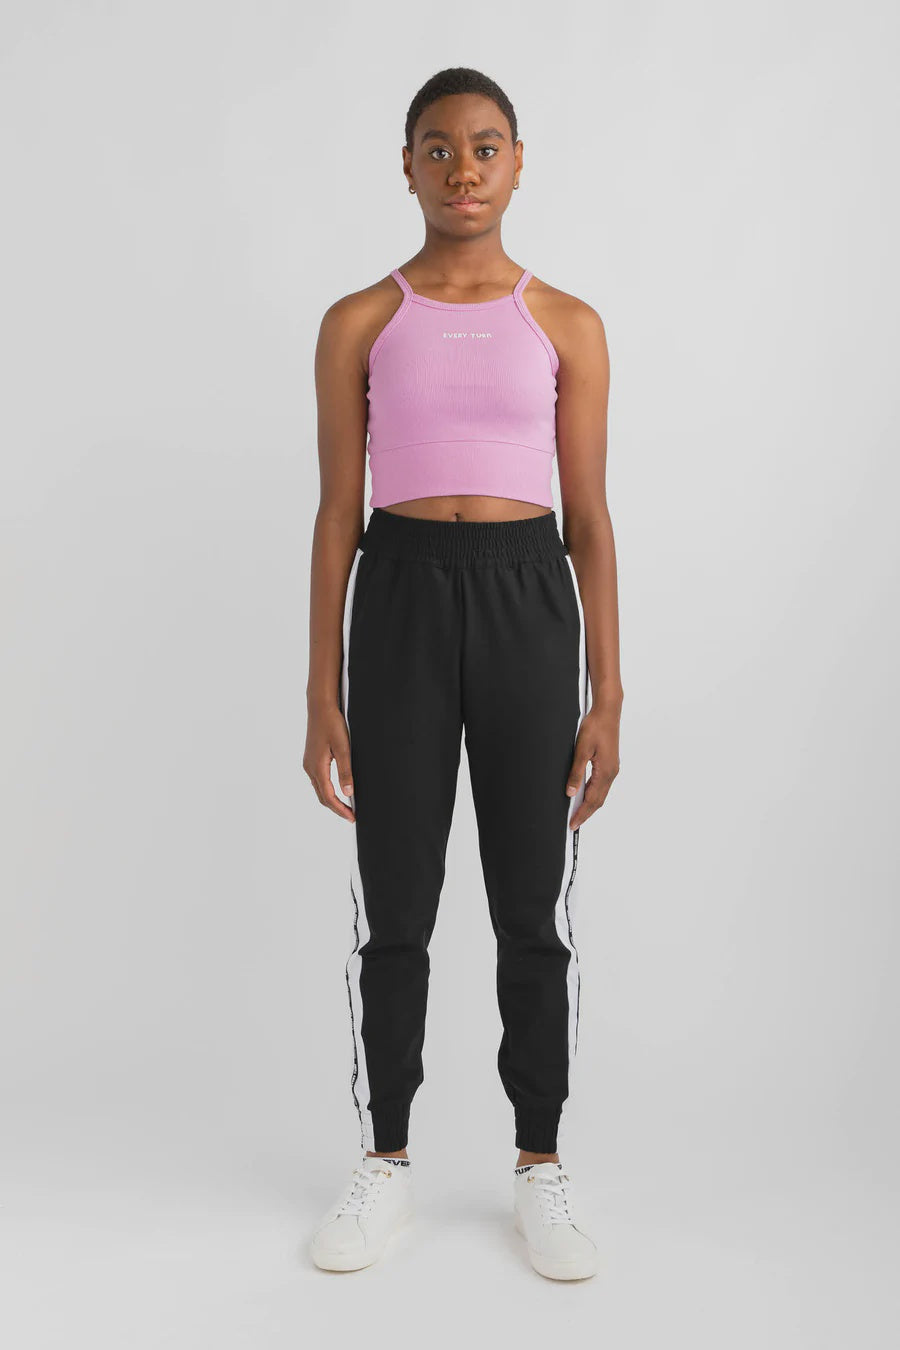 Every Turn Free Form Cropped Singlet